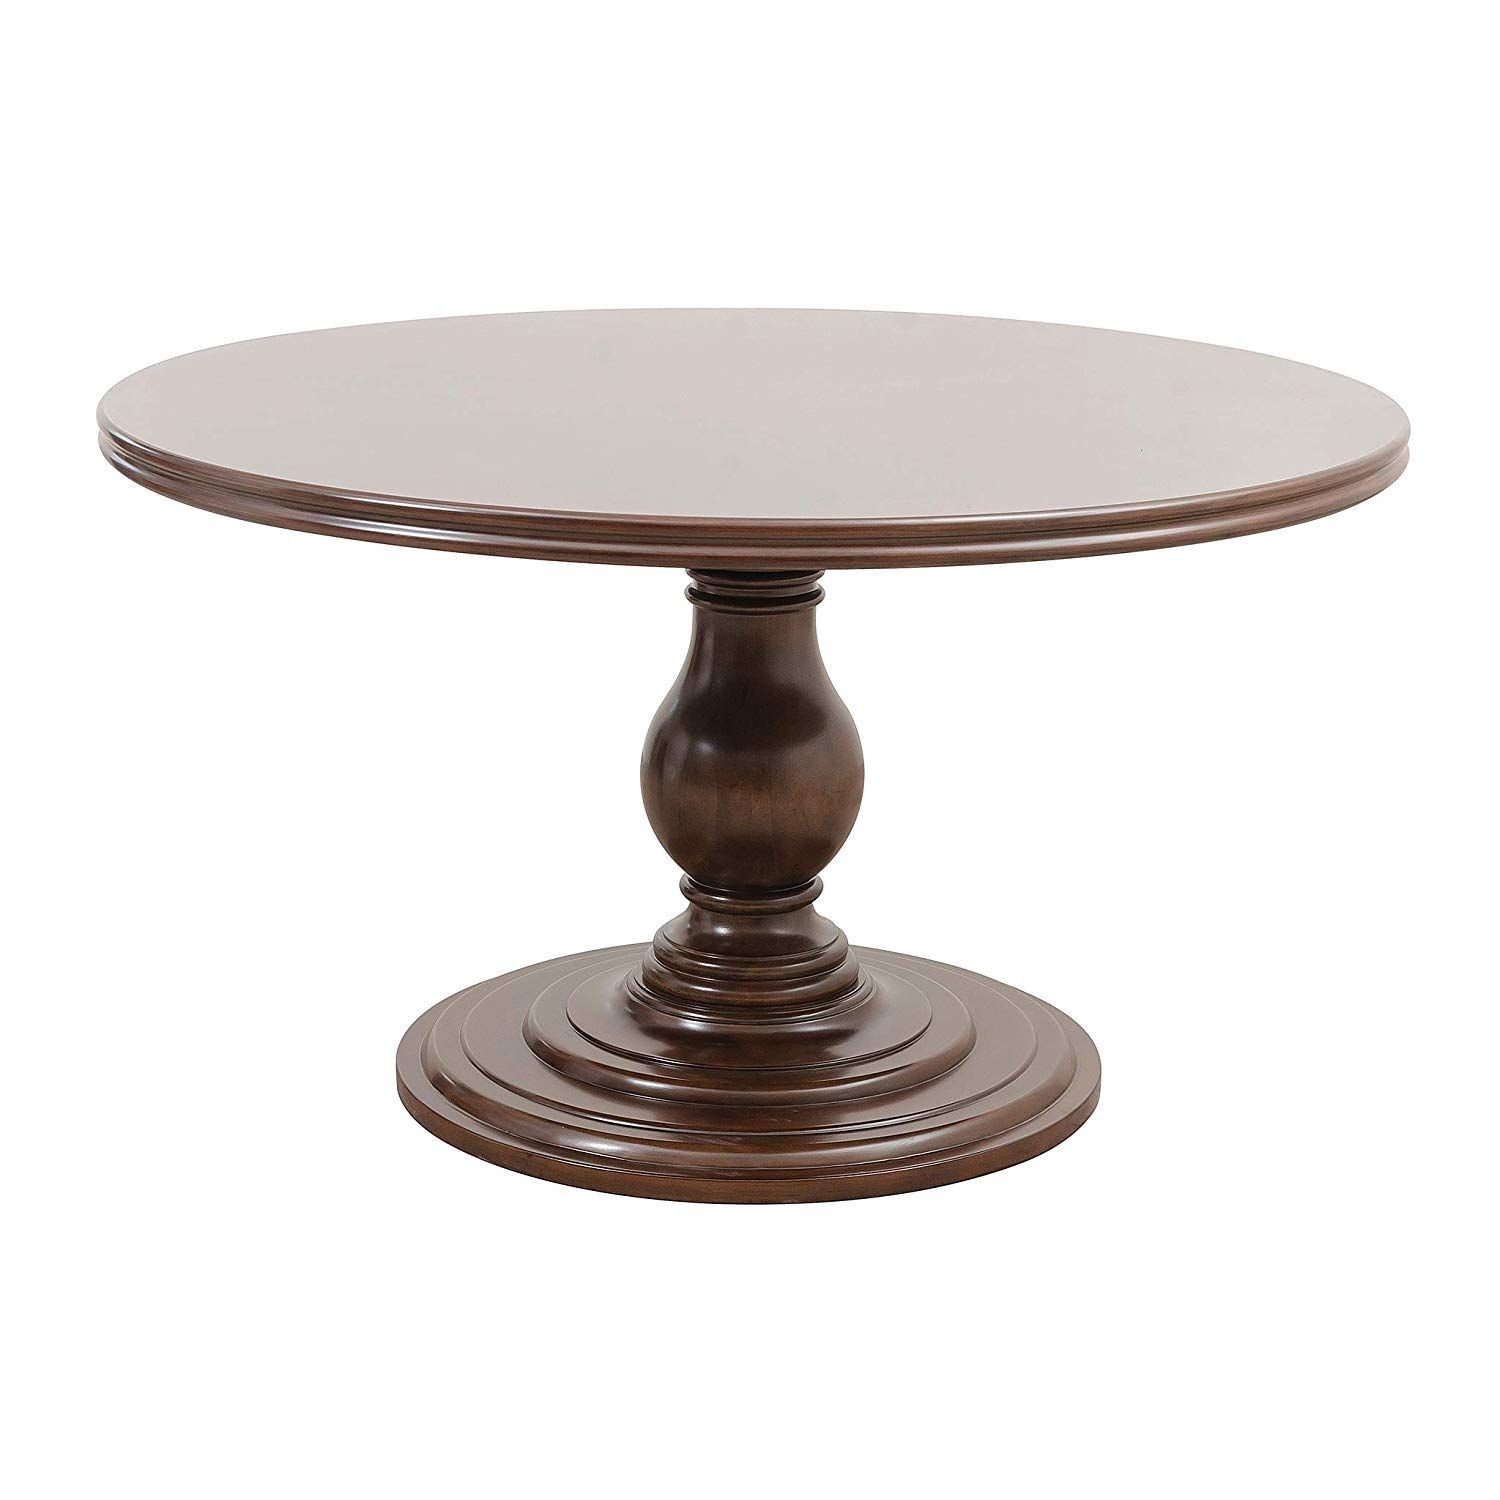 Homelegance Oratorio 54 Round Pedestal Dining Table, Dark In Best And Newest Aztec Round Pedestal Dining Tables (View 3 of 25)